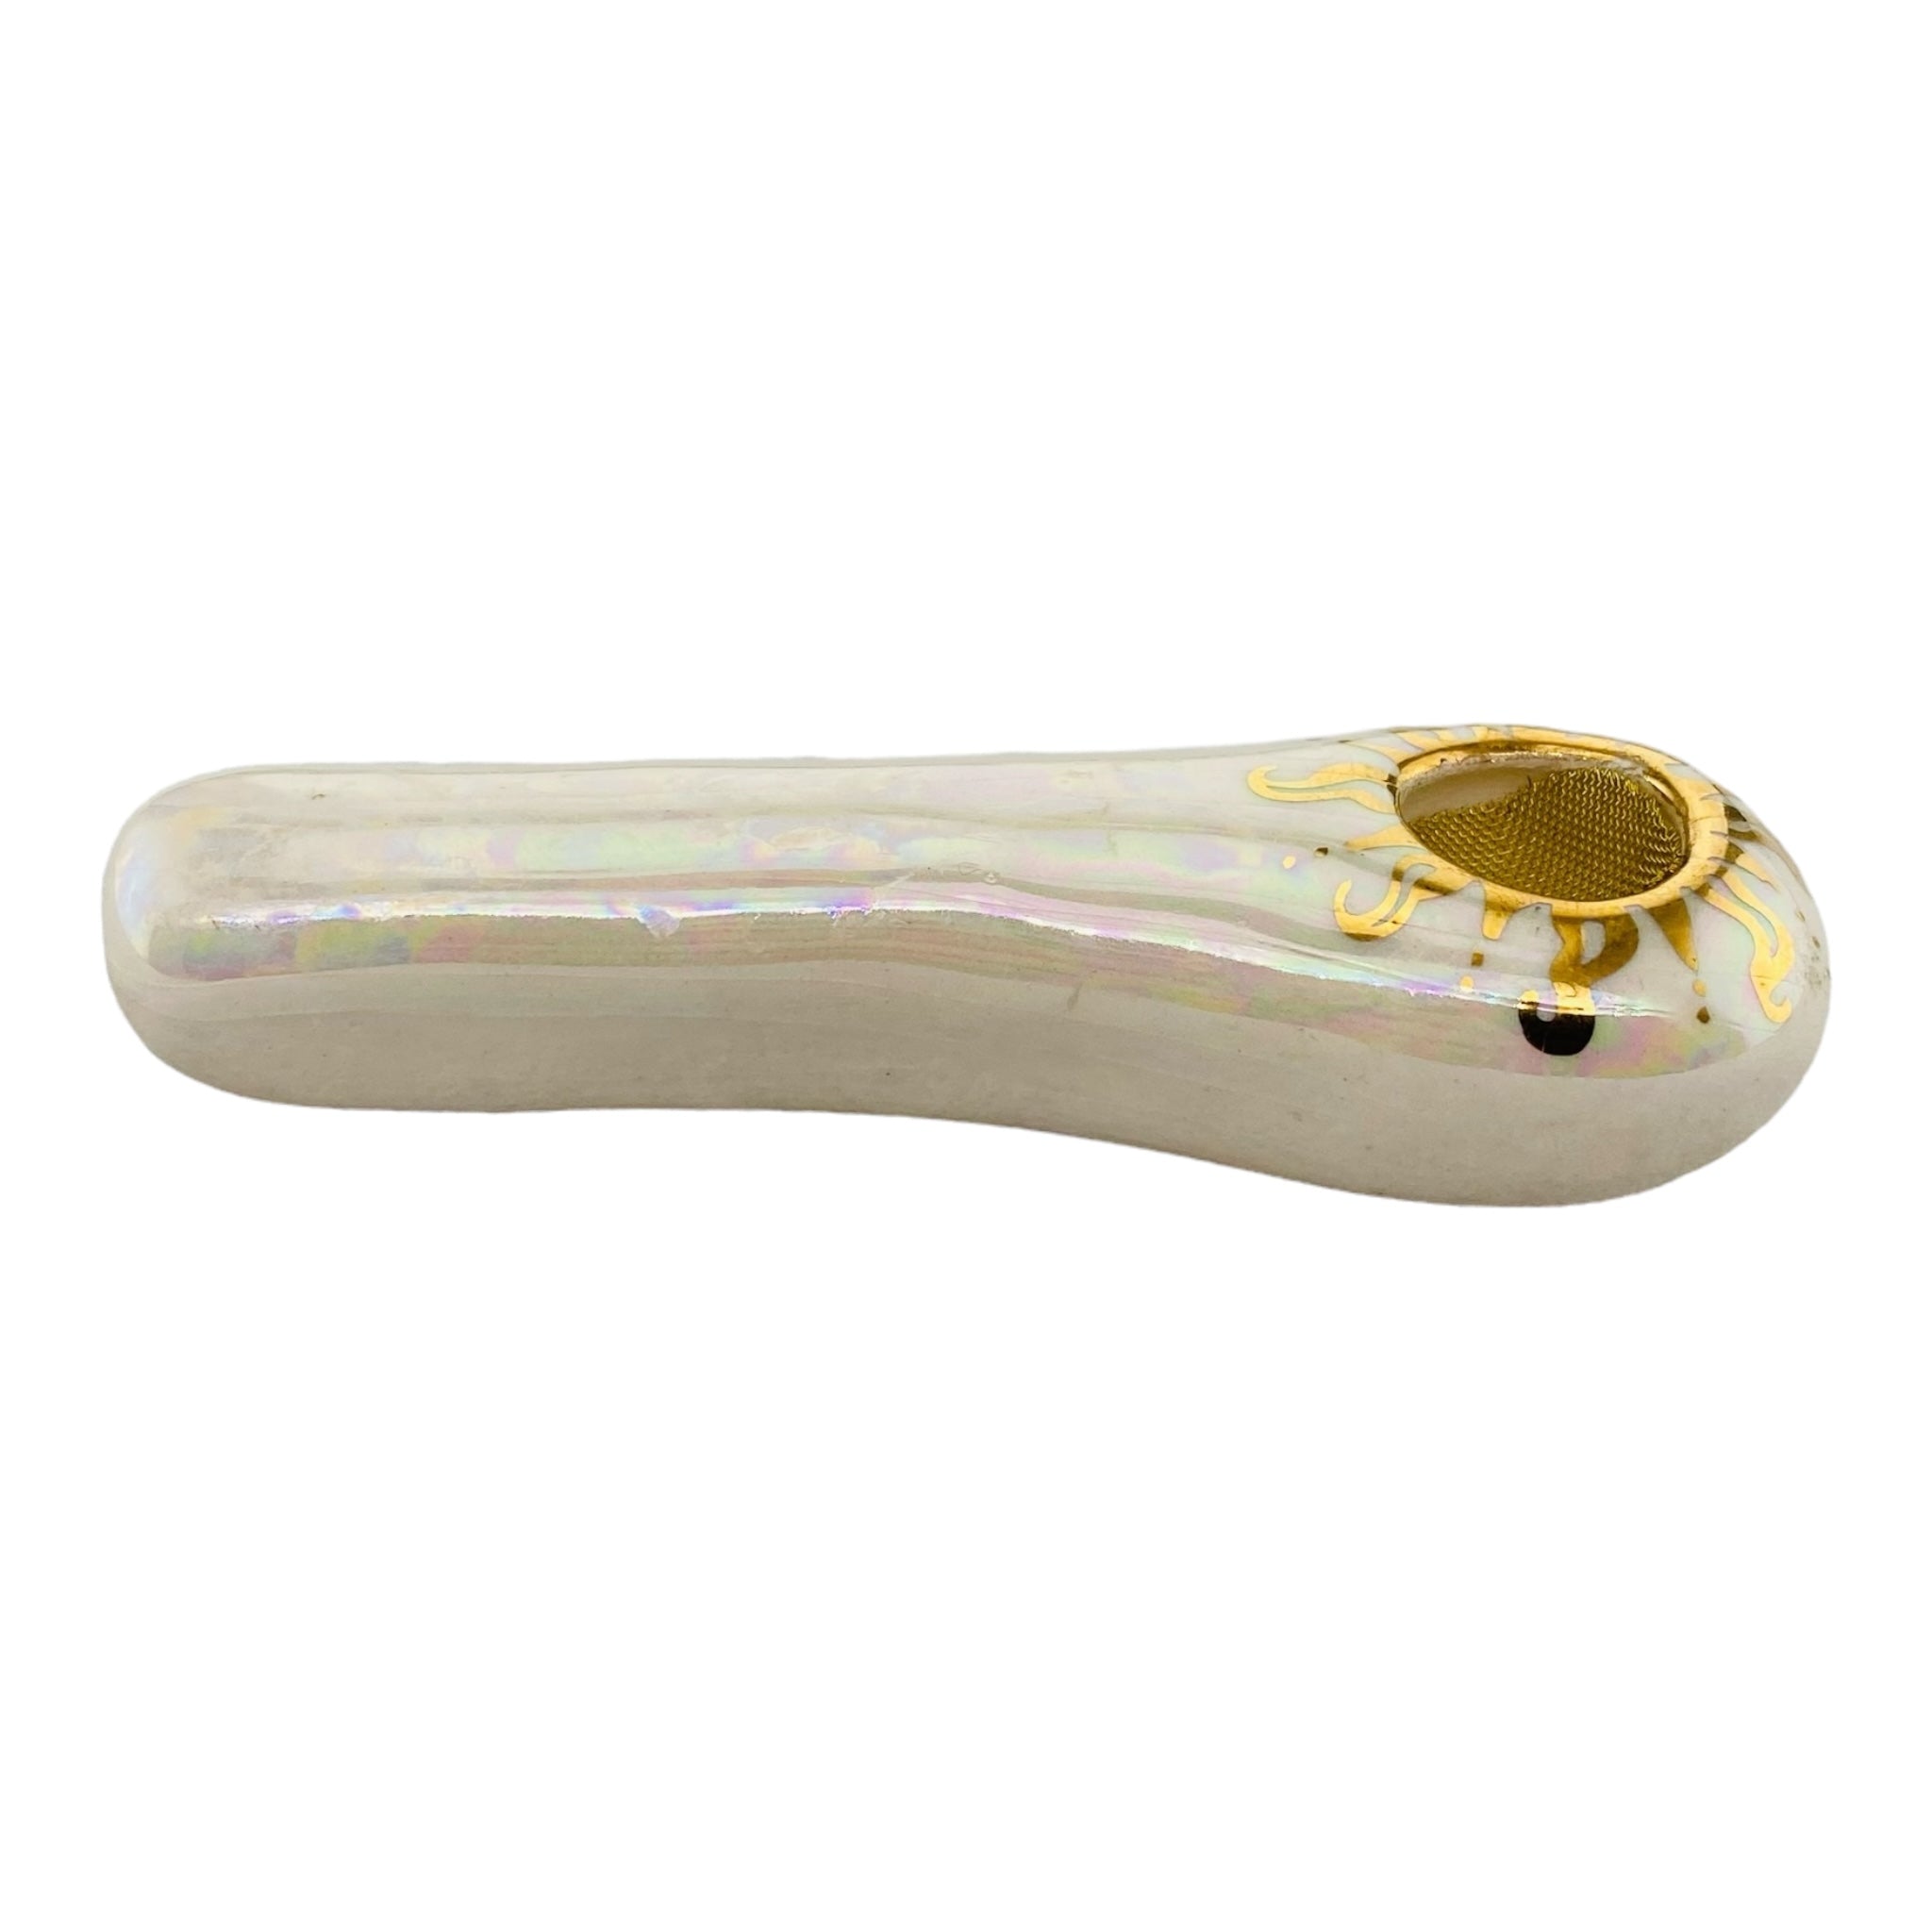 Pearl White Ceramic Hand Pipe Basic Spoon with brass screen